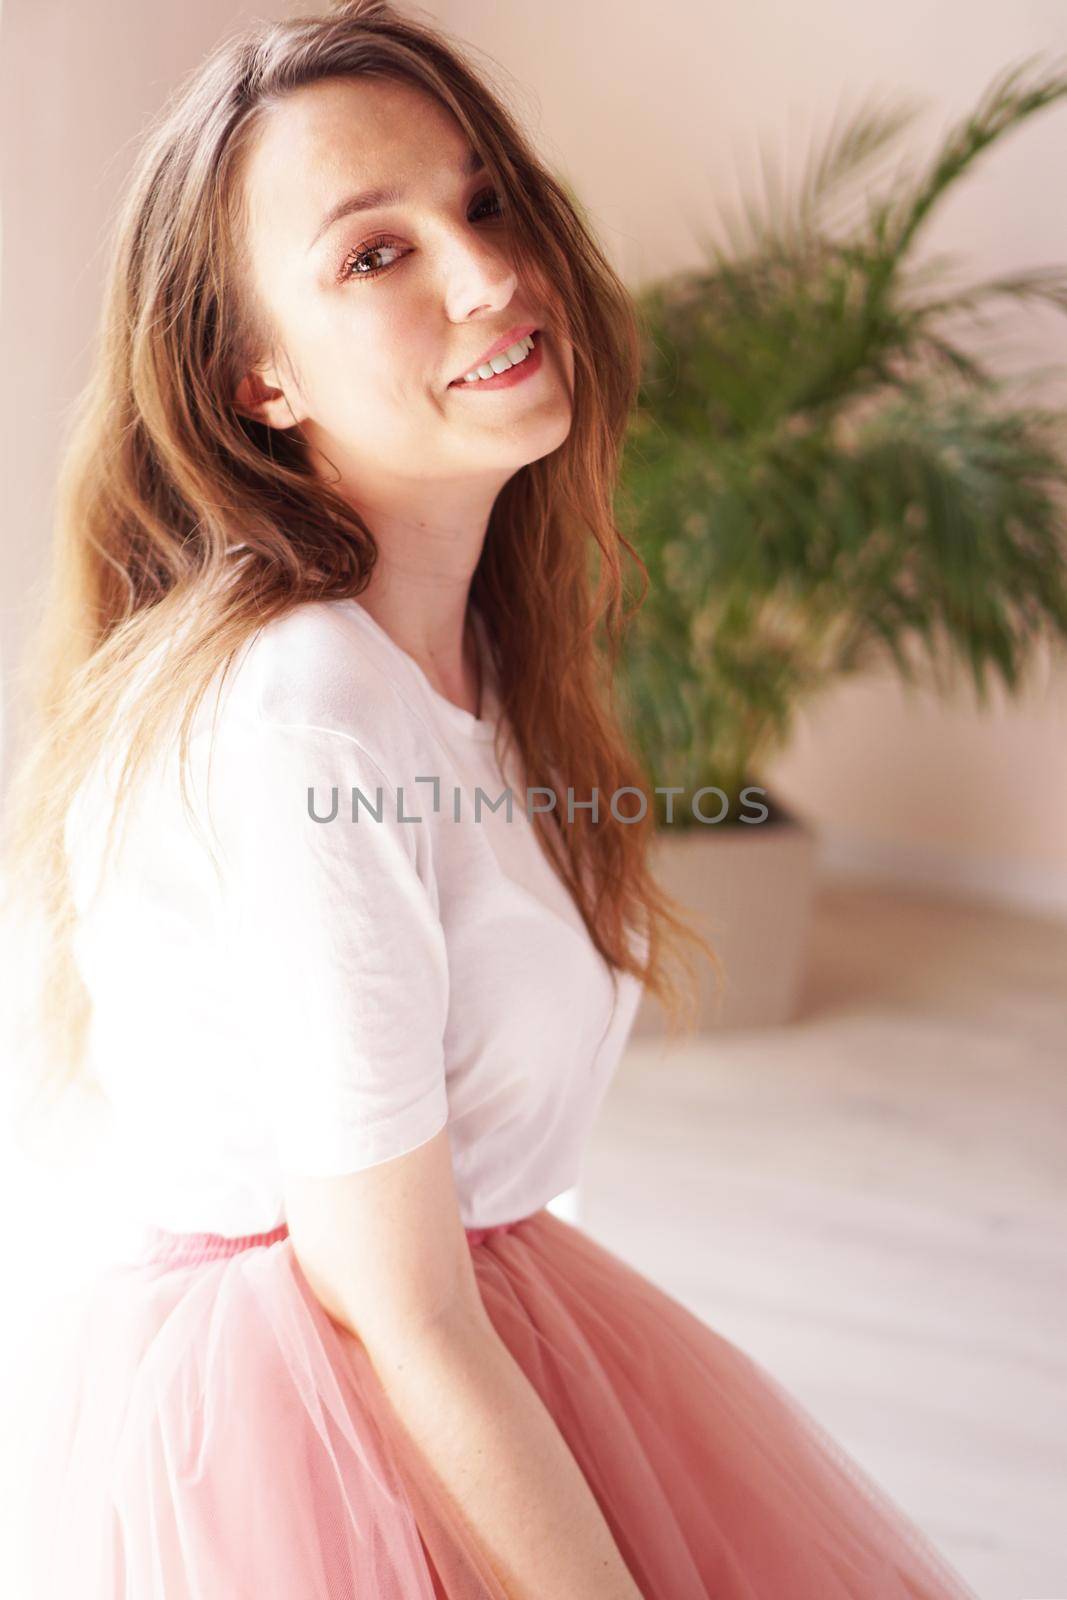 Fashion portrait. Attractive woman in pink skirt and white t-shirt looking at camera - soft colors of interior